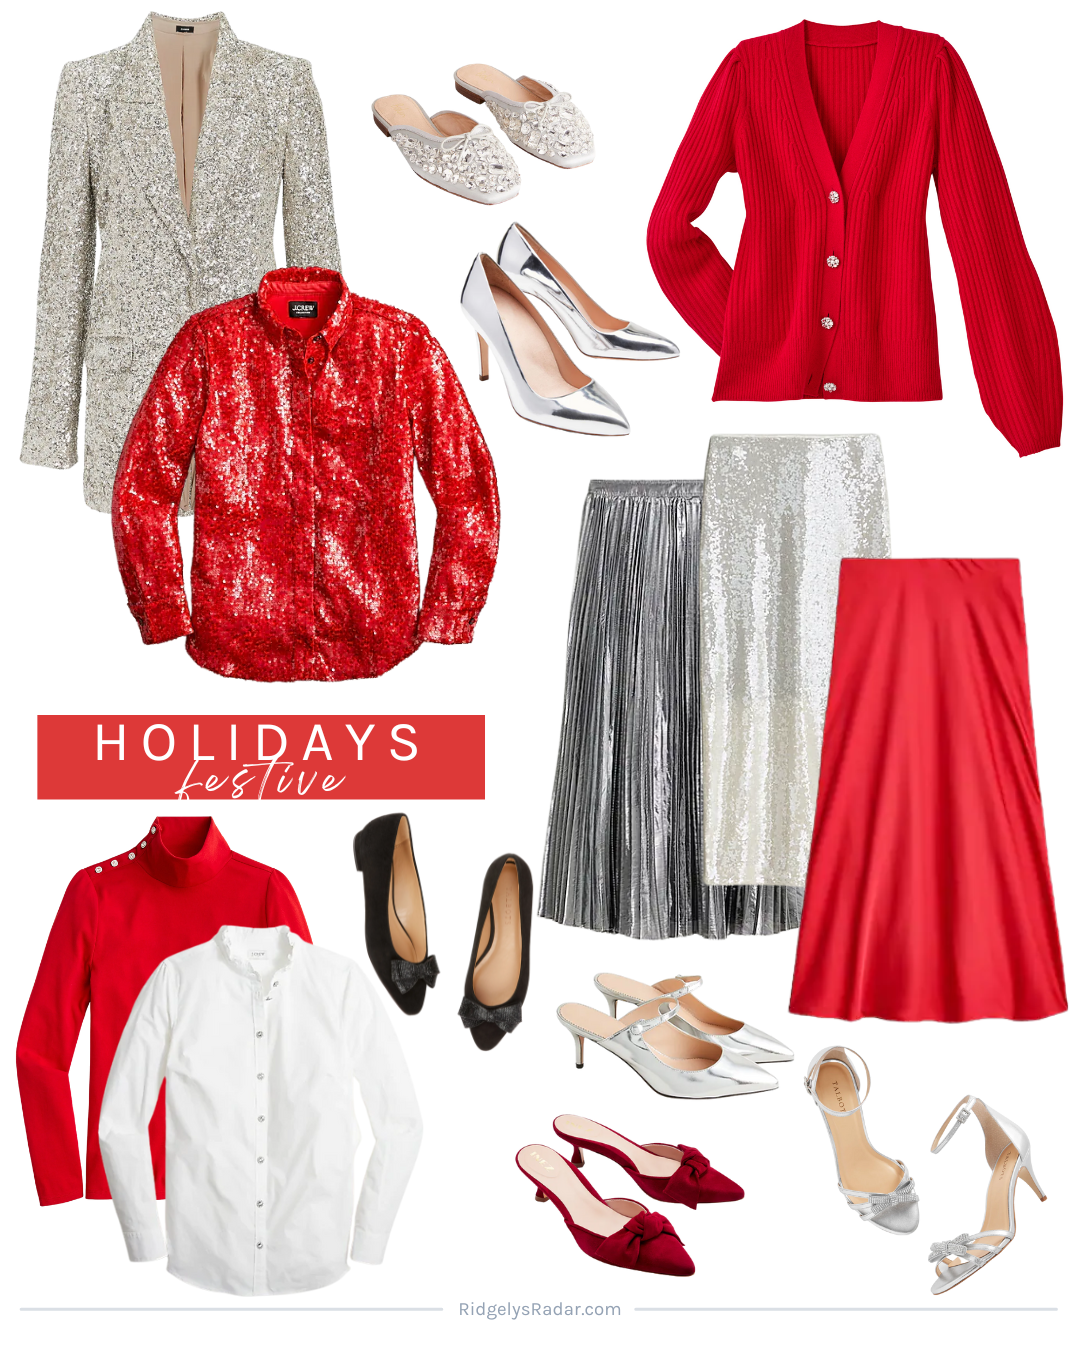 Nothing is more festive than Red and Silver Dressing for Christmas! You can mix and match all of these items for a dressy or casual look.